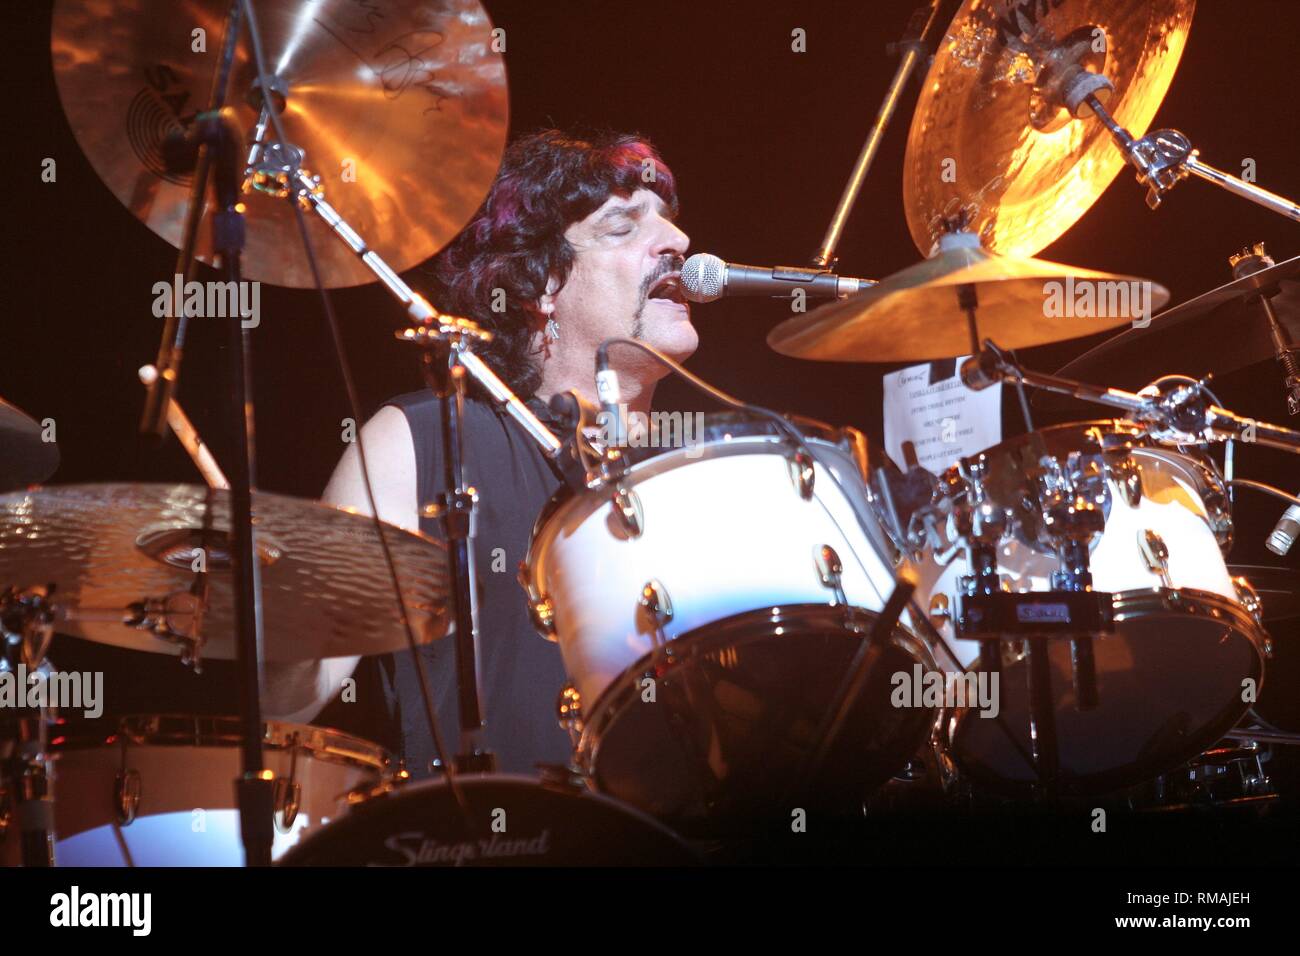 Drummer Carmine Appice of the psychedelic rock band Vanilla Fudge is shown performing onstage during a 'live' concert appearance. Stock Photo